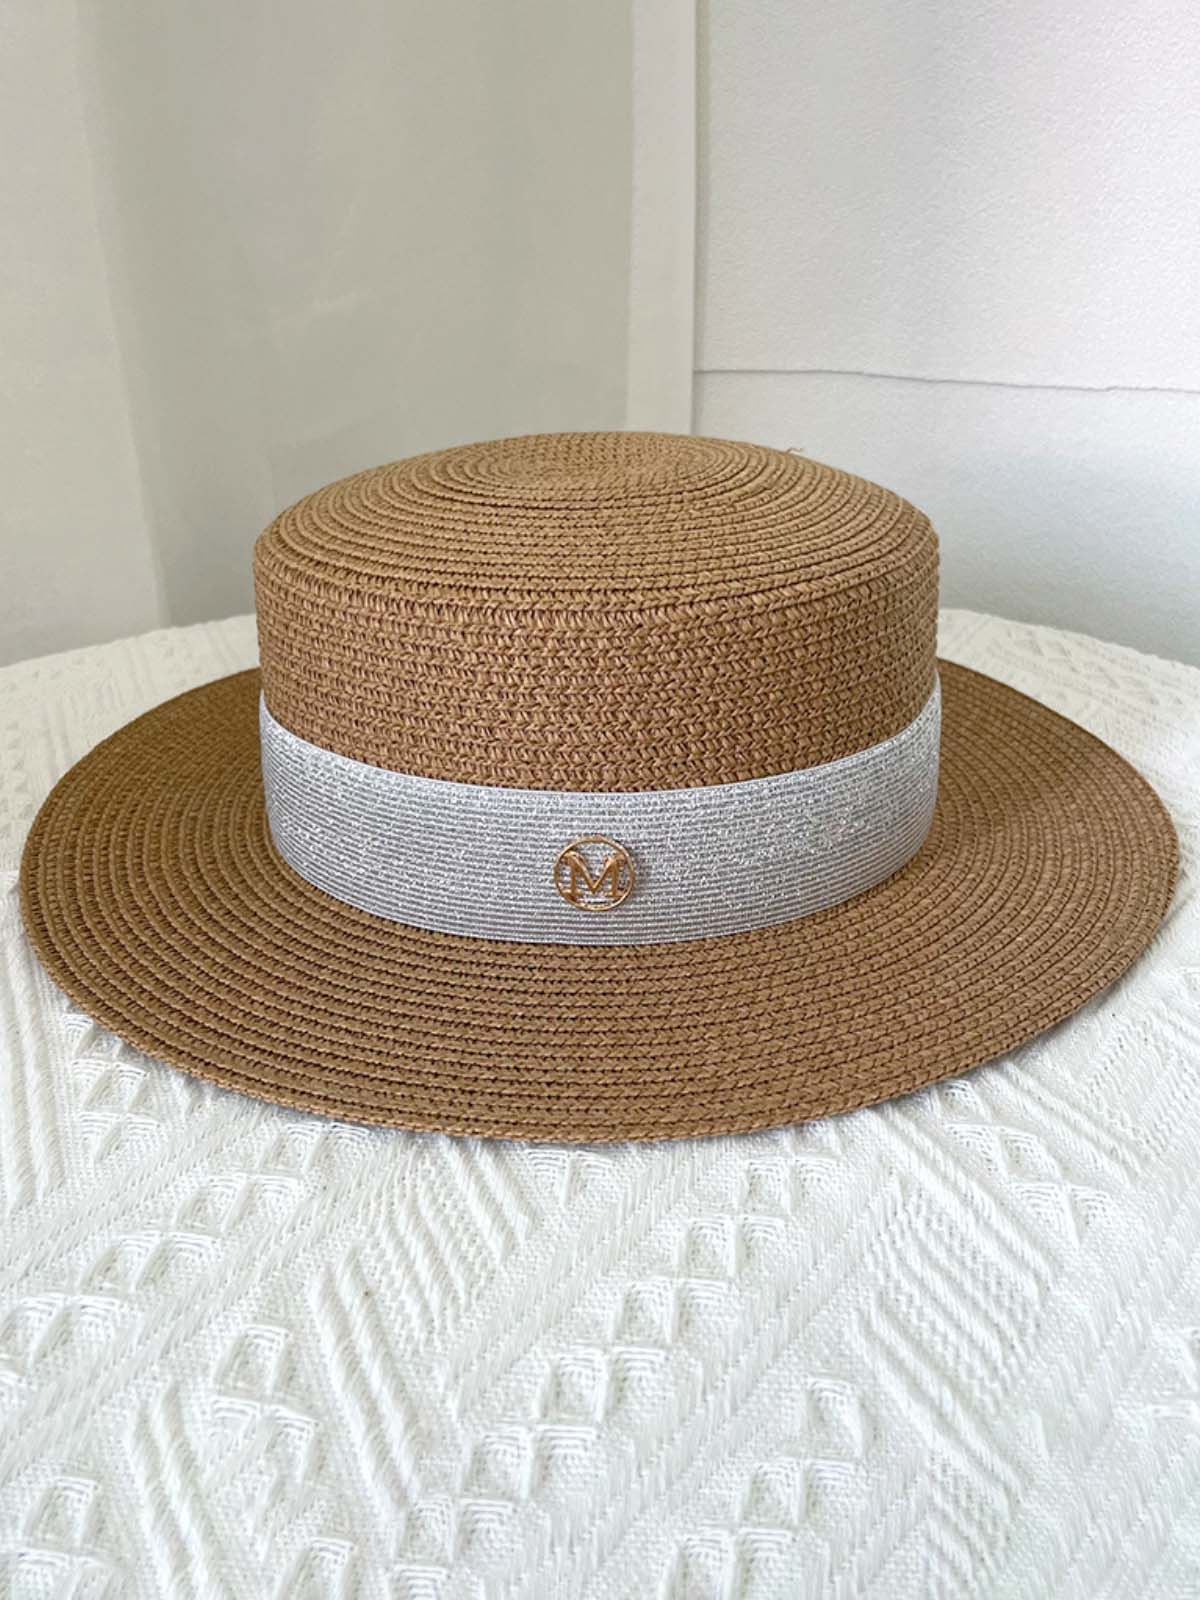 A Touch Of Class Embellished Brown Boater Hat